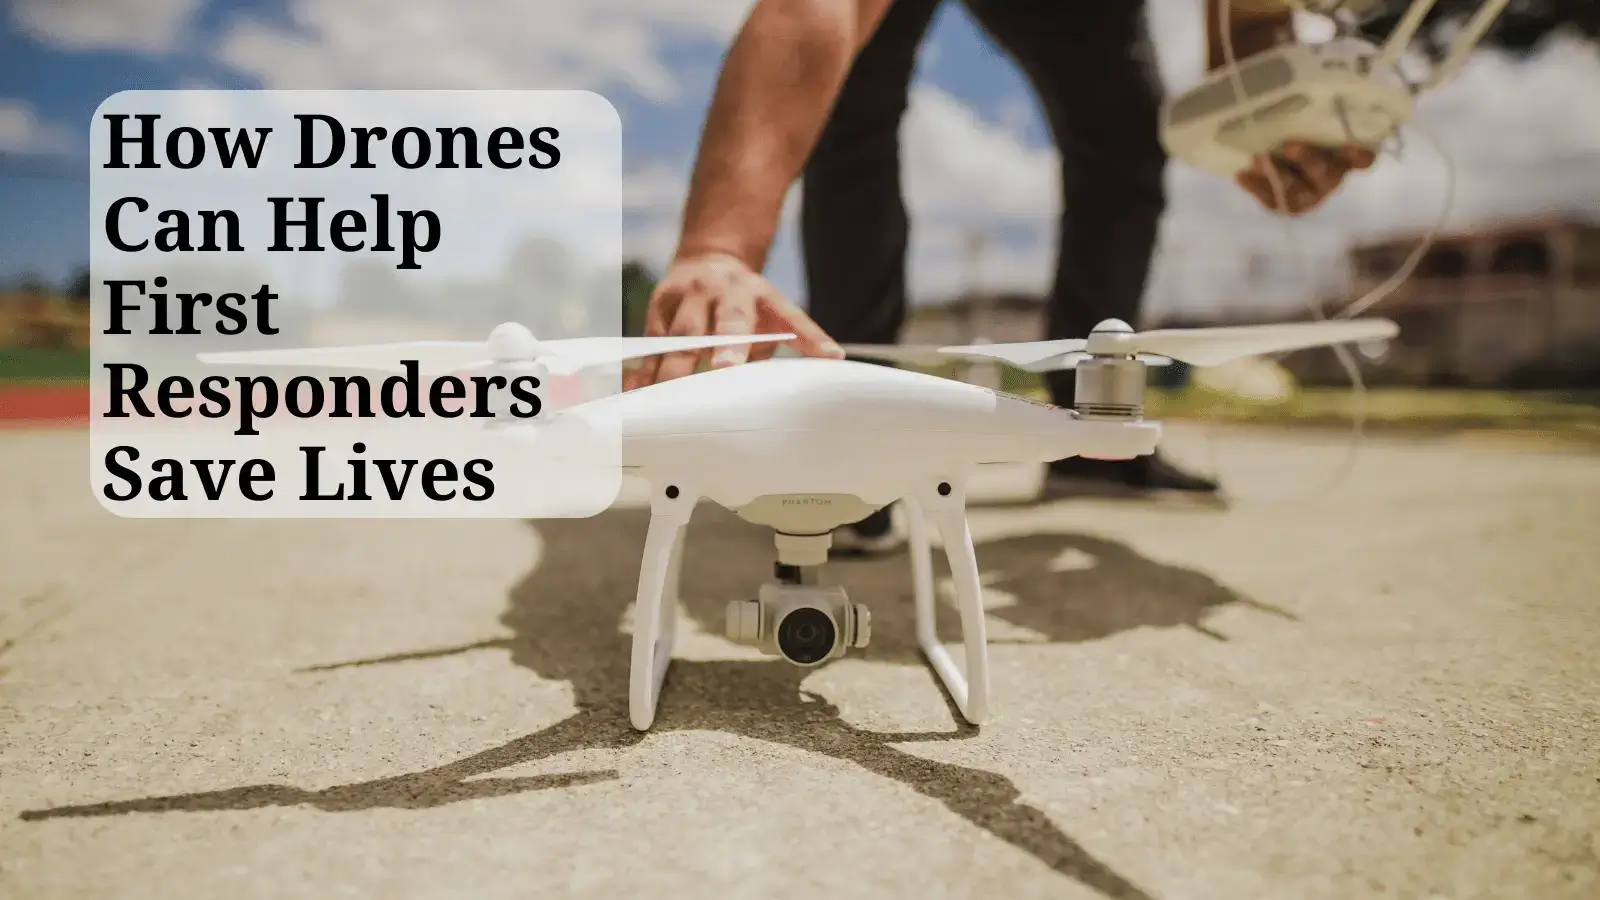 How Drones Can Help First Responders Save Lives